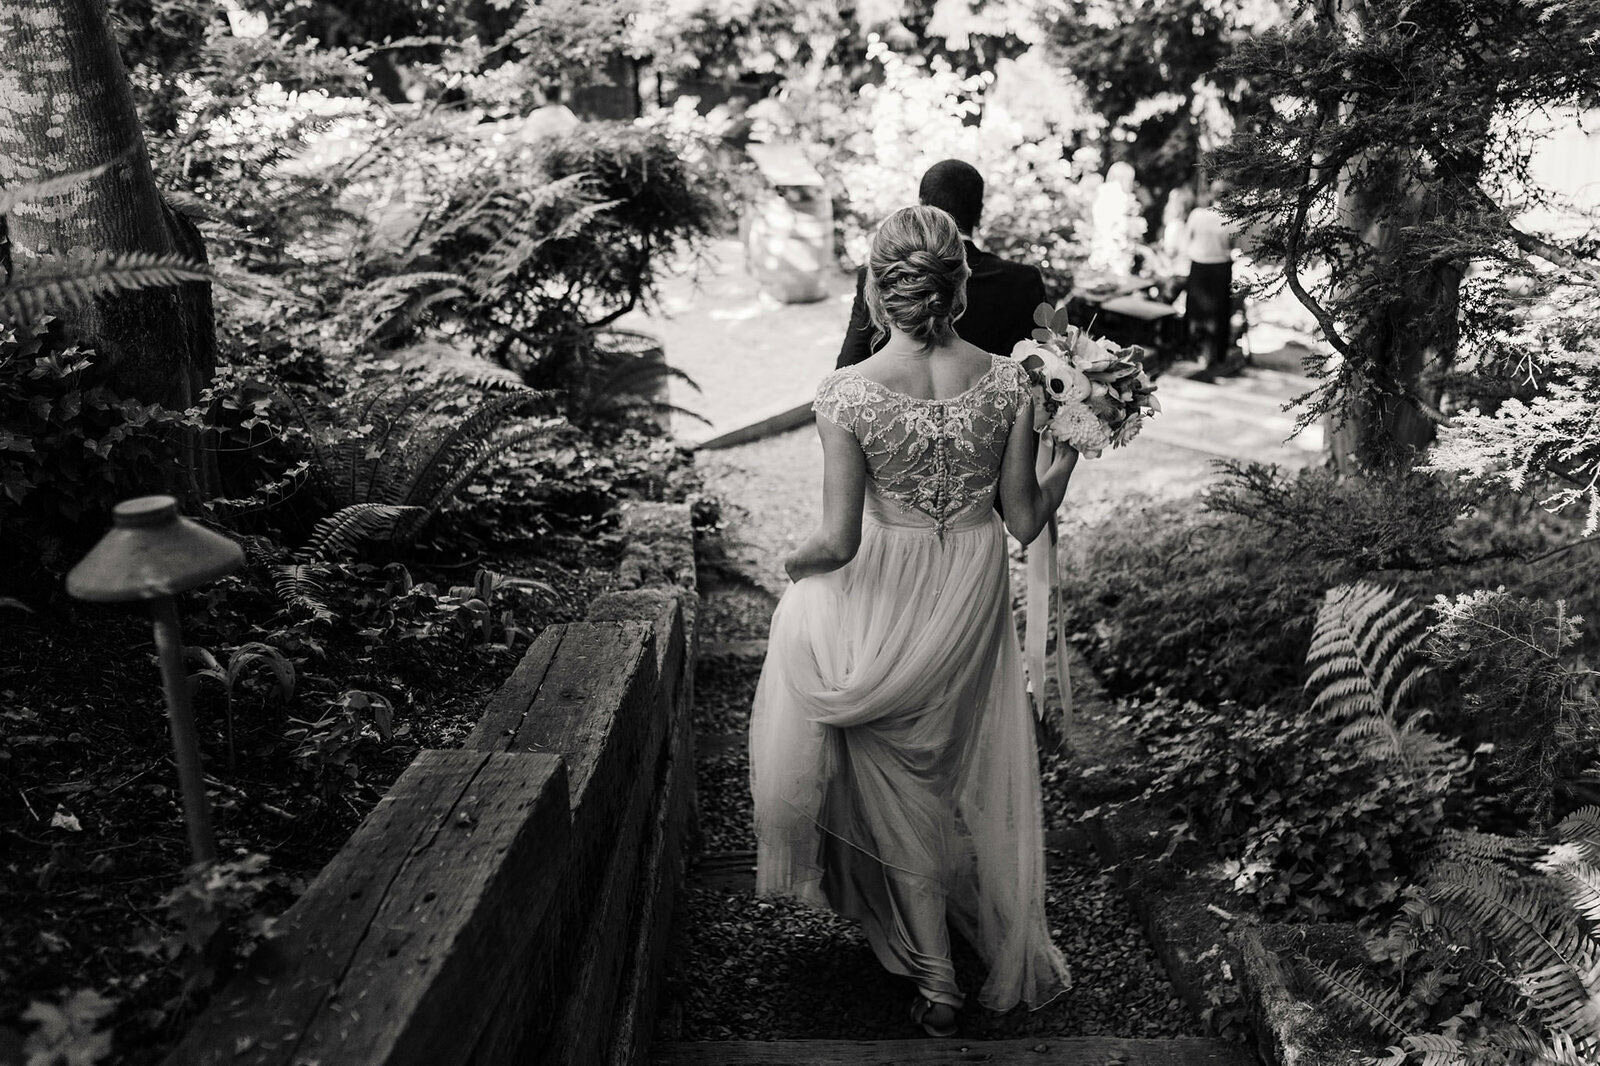 A stunning black and white image of a bride wearing a flowy wedding gown walking down a wooded path